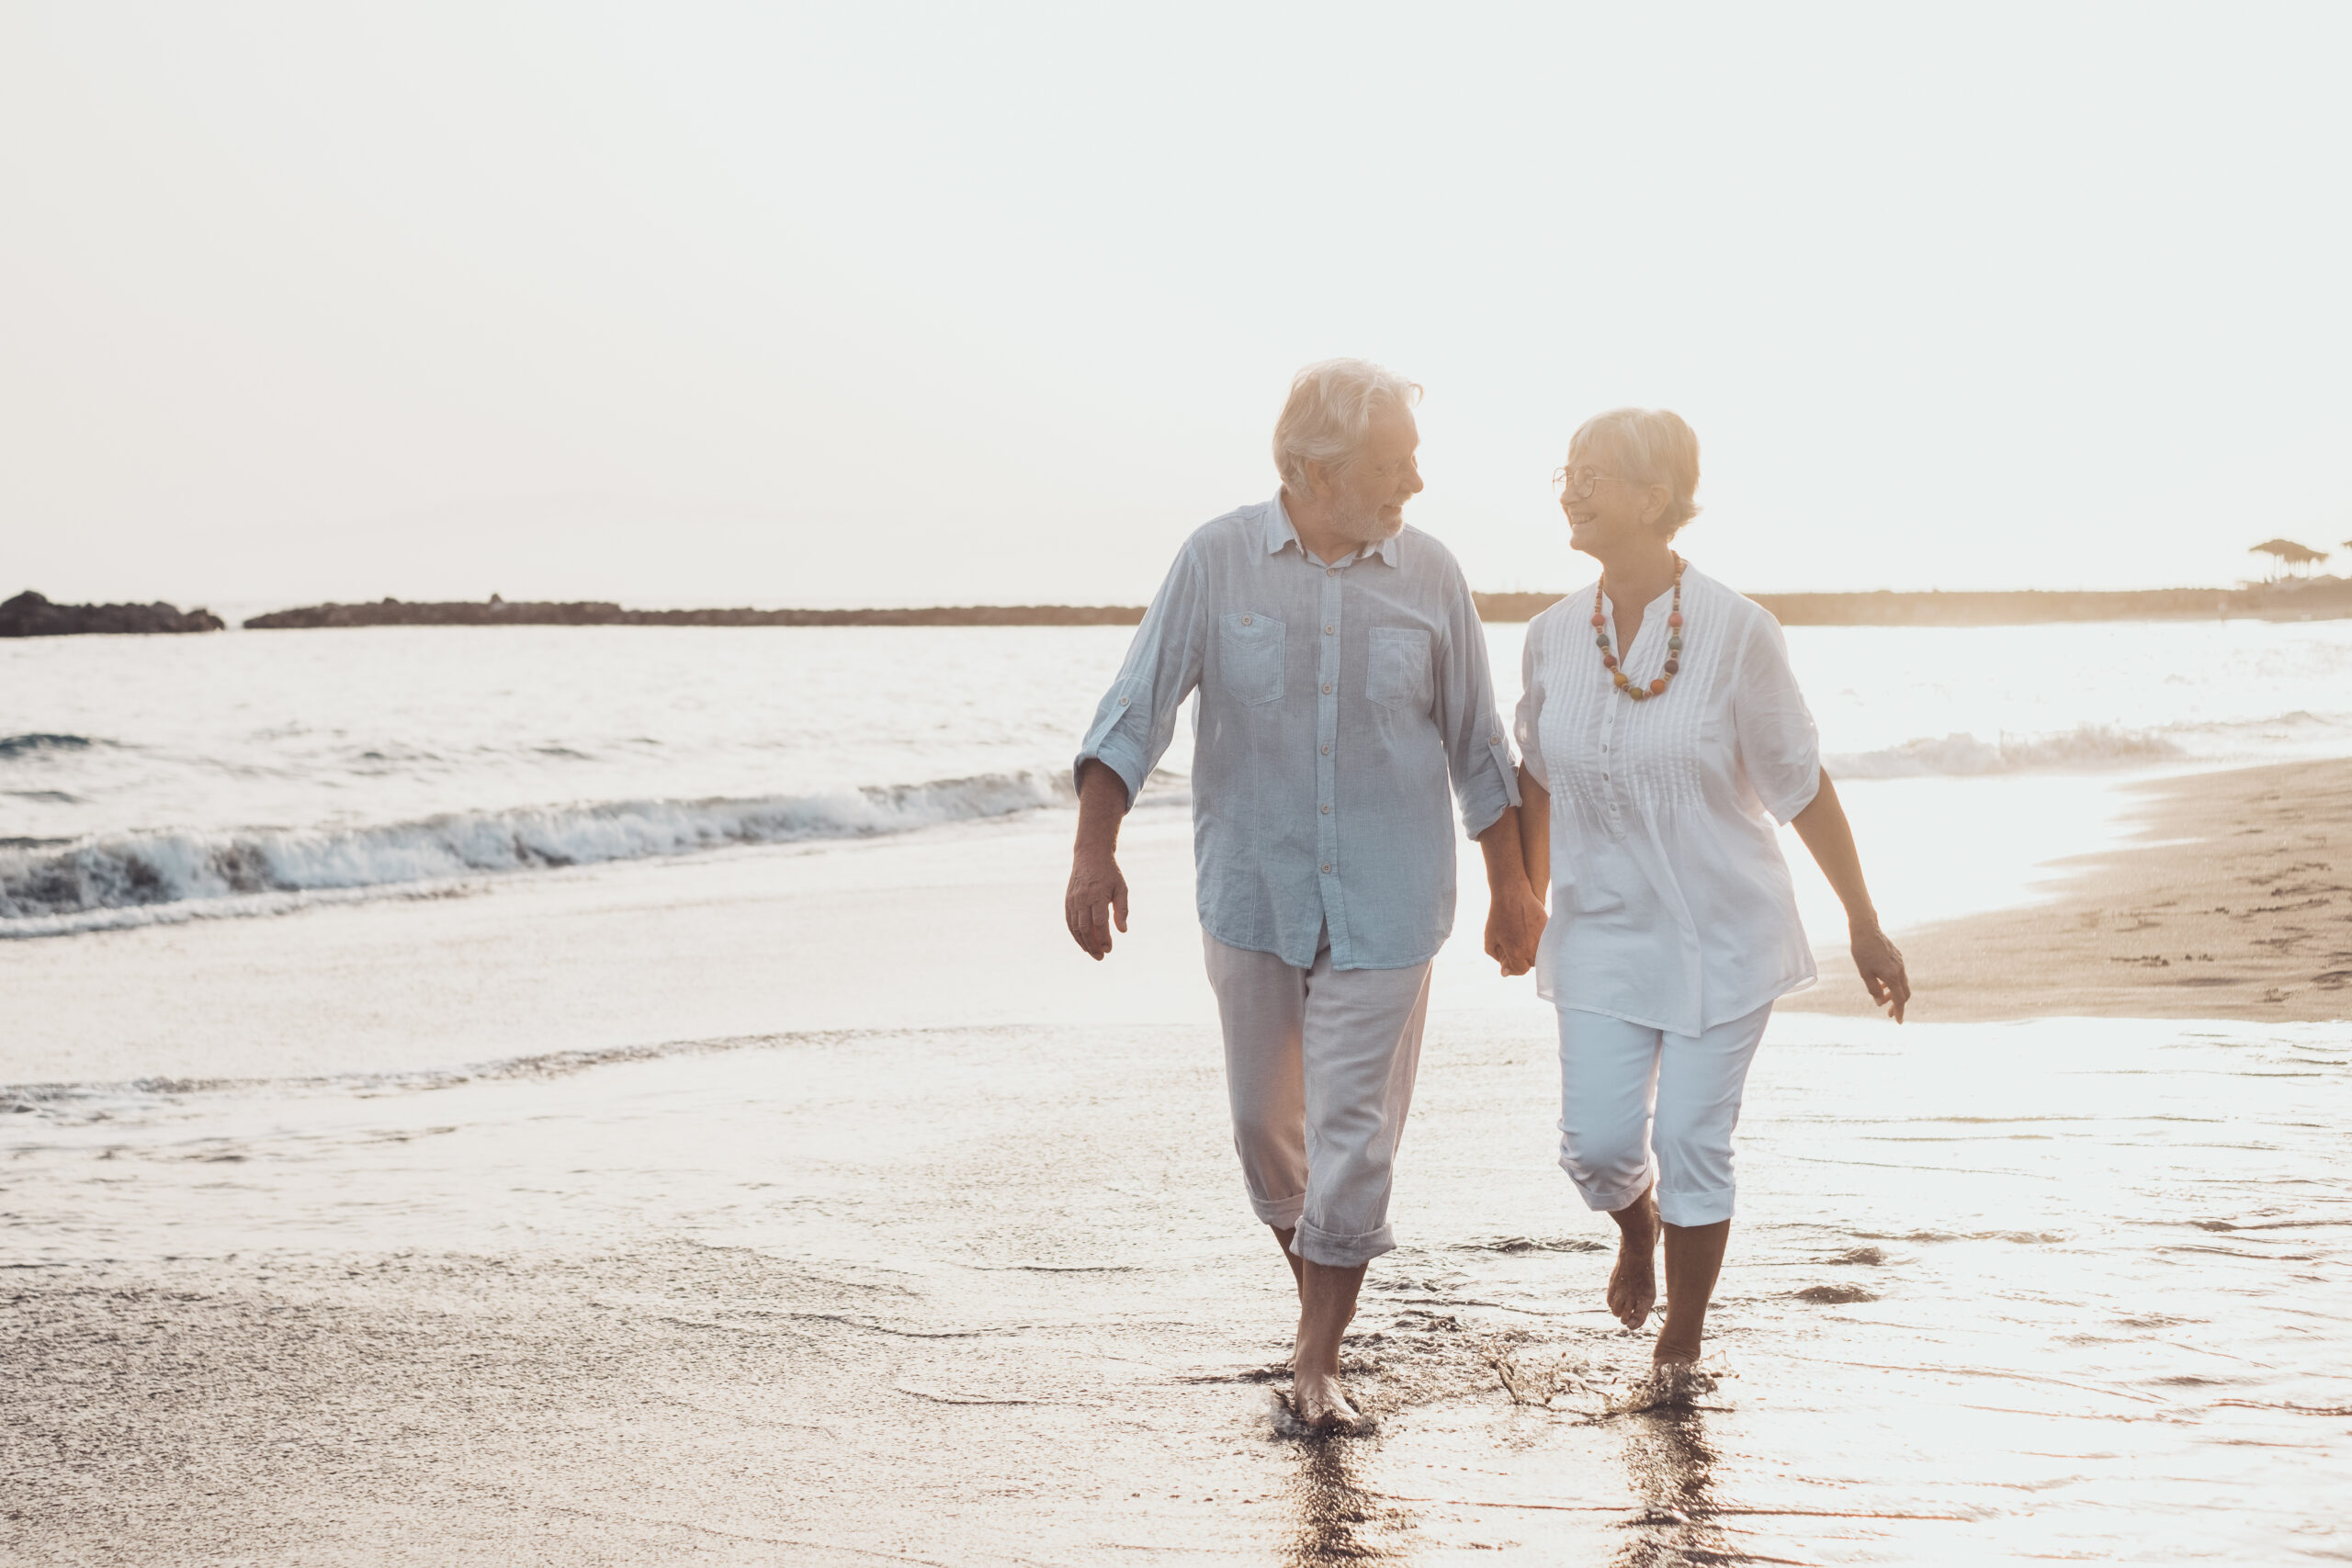 After retiring to a warmer climate using funds from their IRA accounts, a couple takes a leisurely walk on the beach.